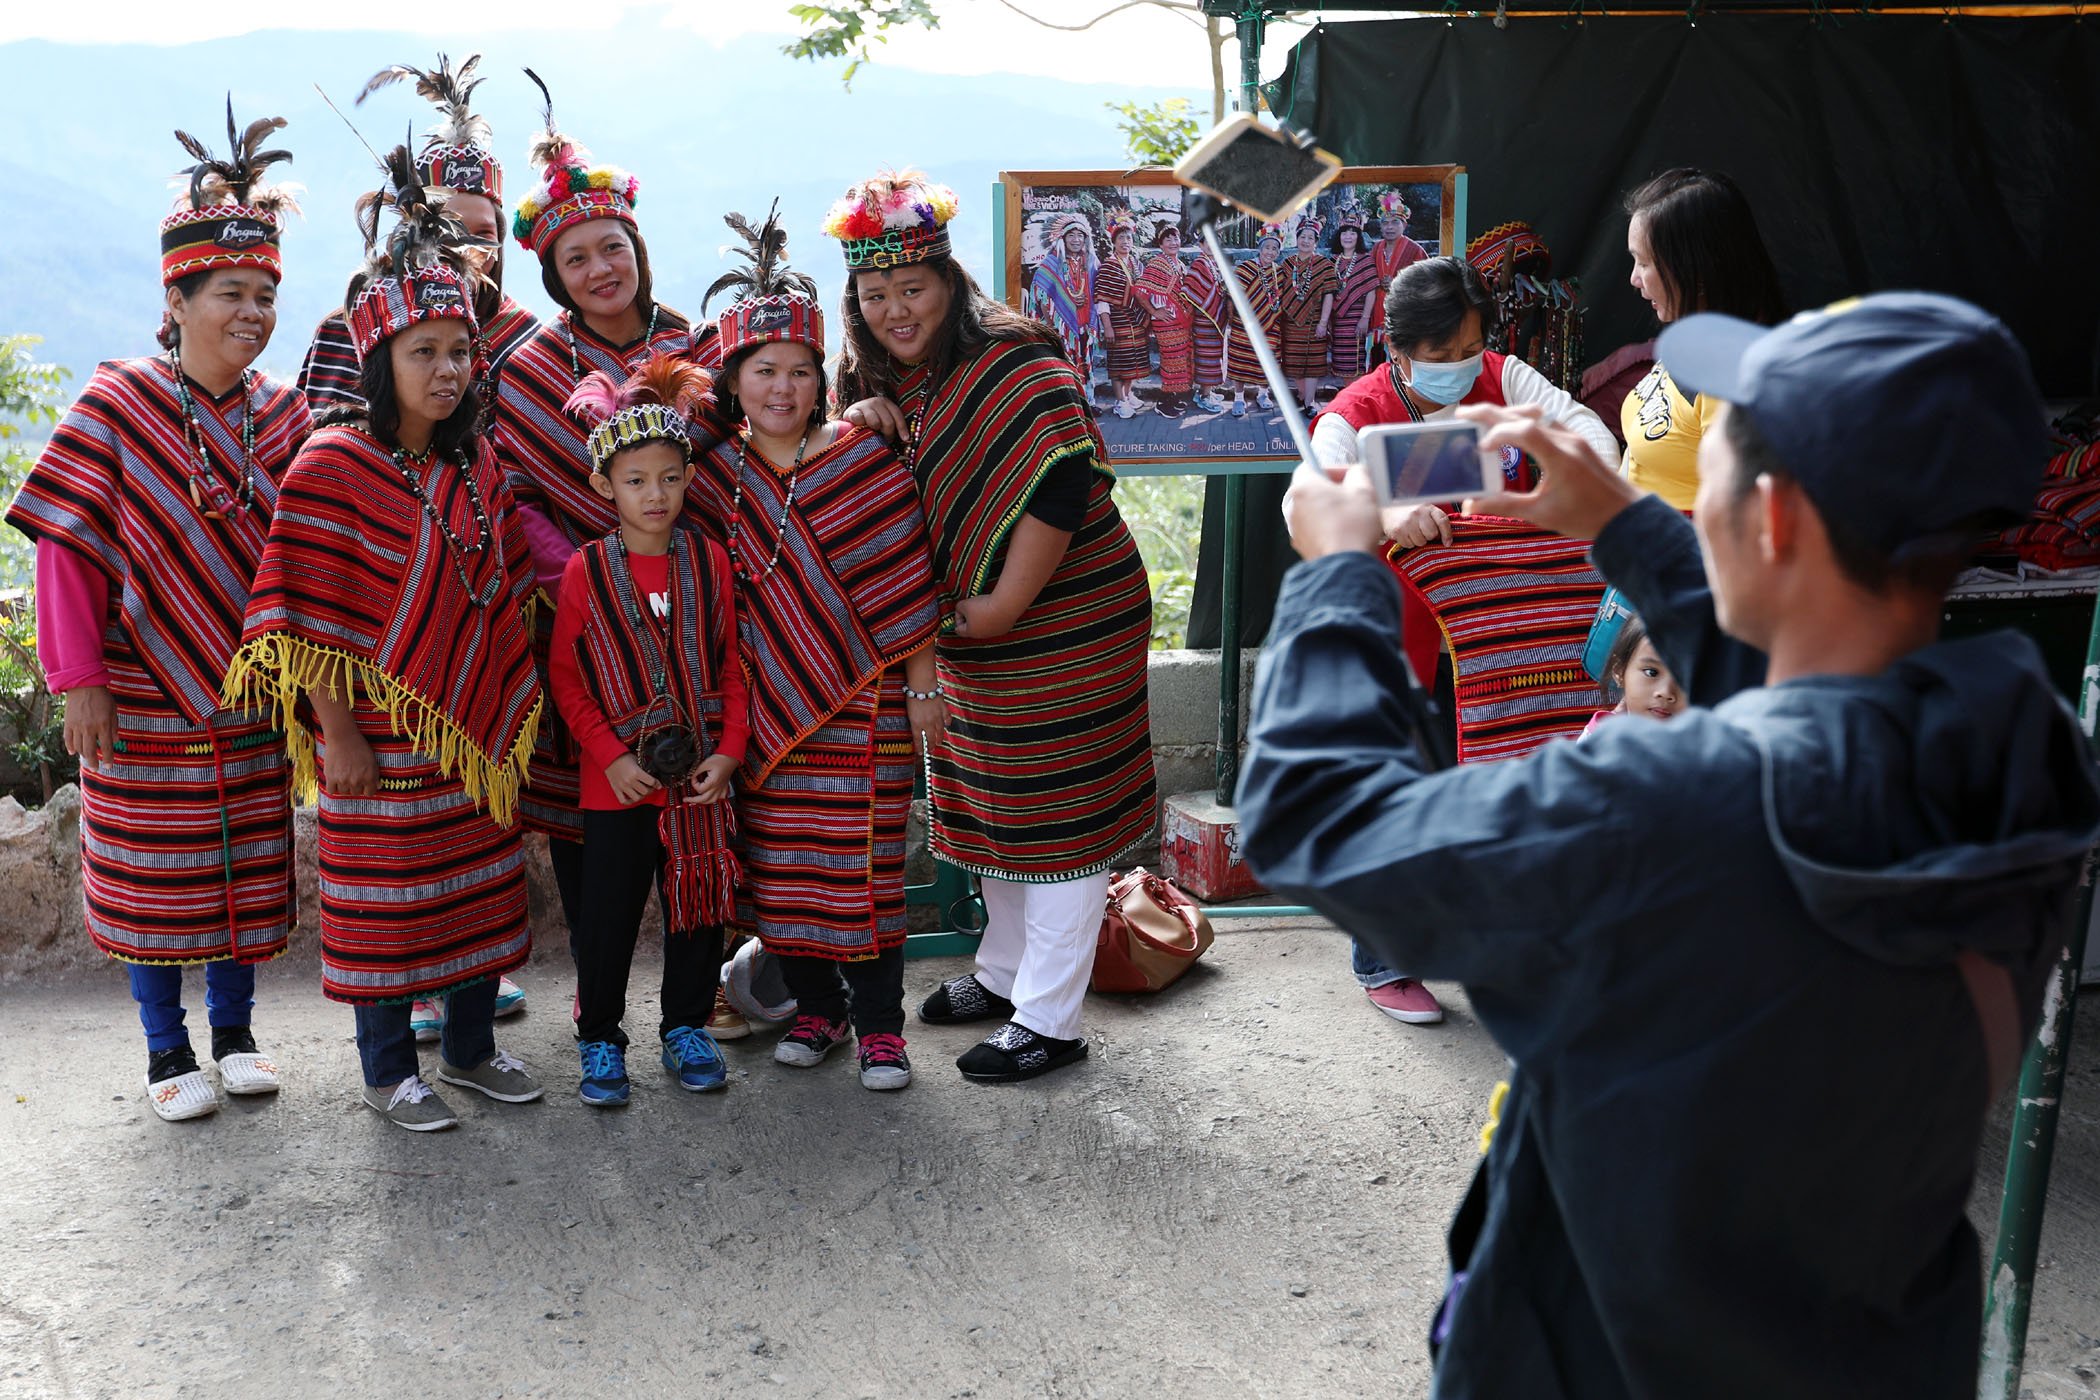 Igorot costumes at Mines view park